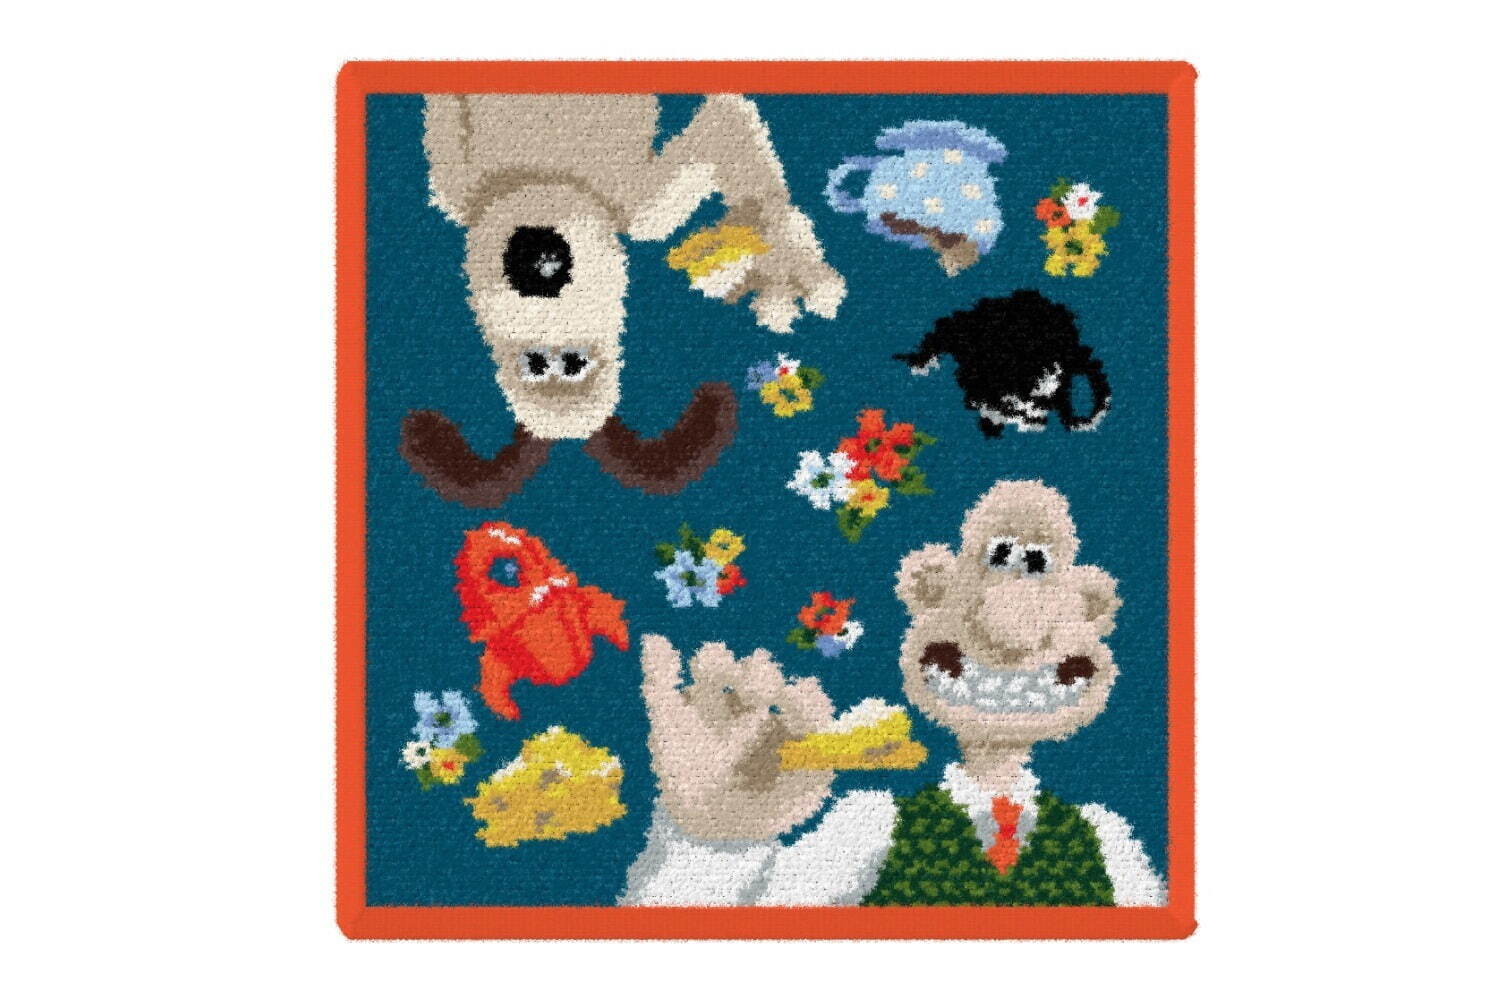 「WALLACE &GROMIT TEA TIME」2,750円